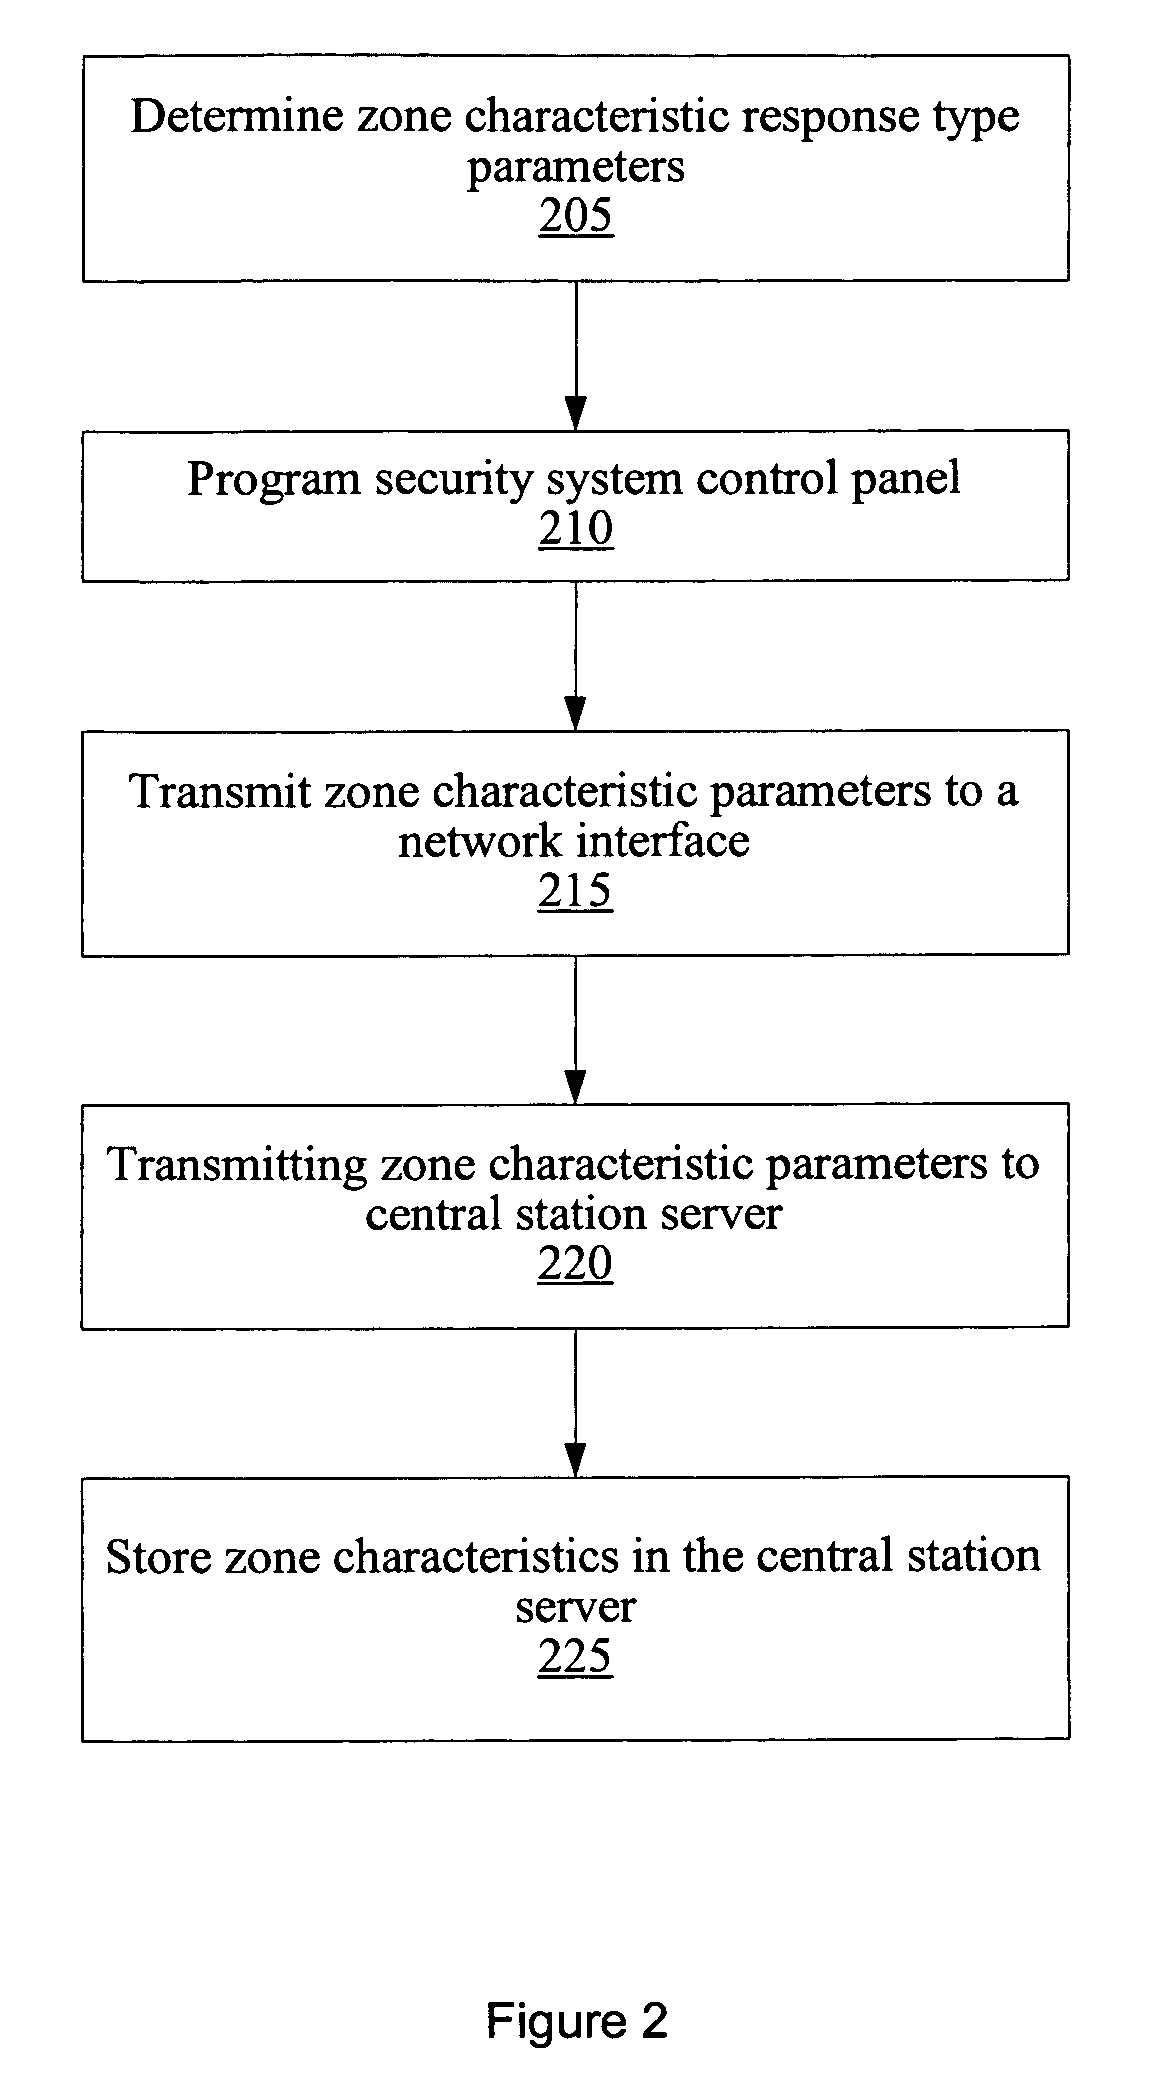 Automatic panel configuration upload to a central station automation system